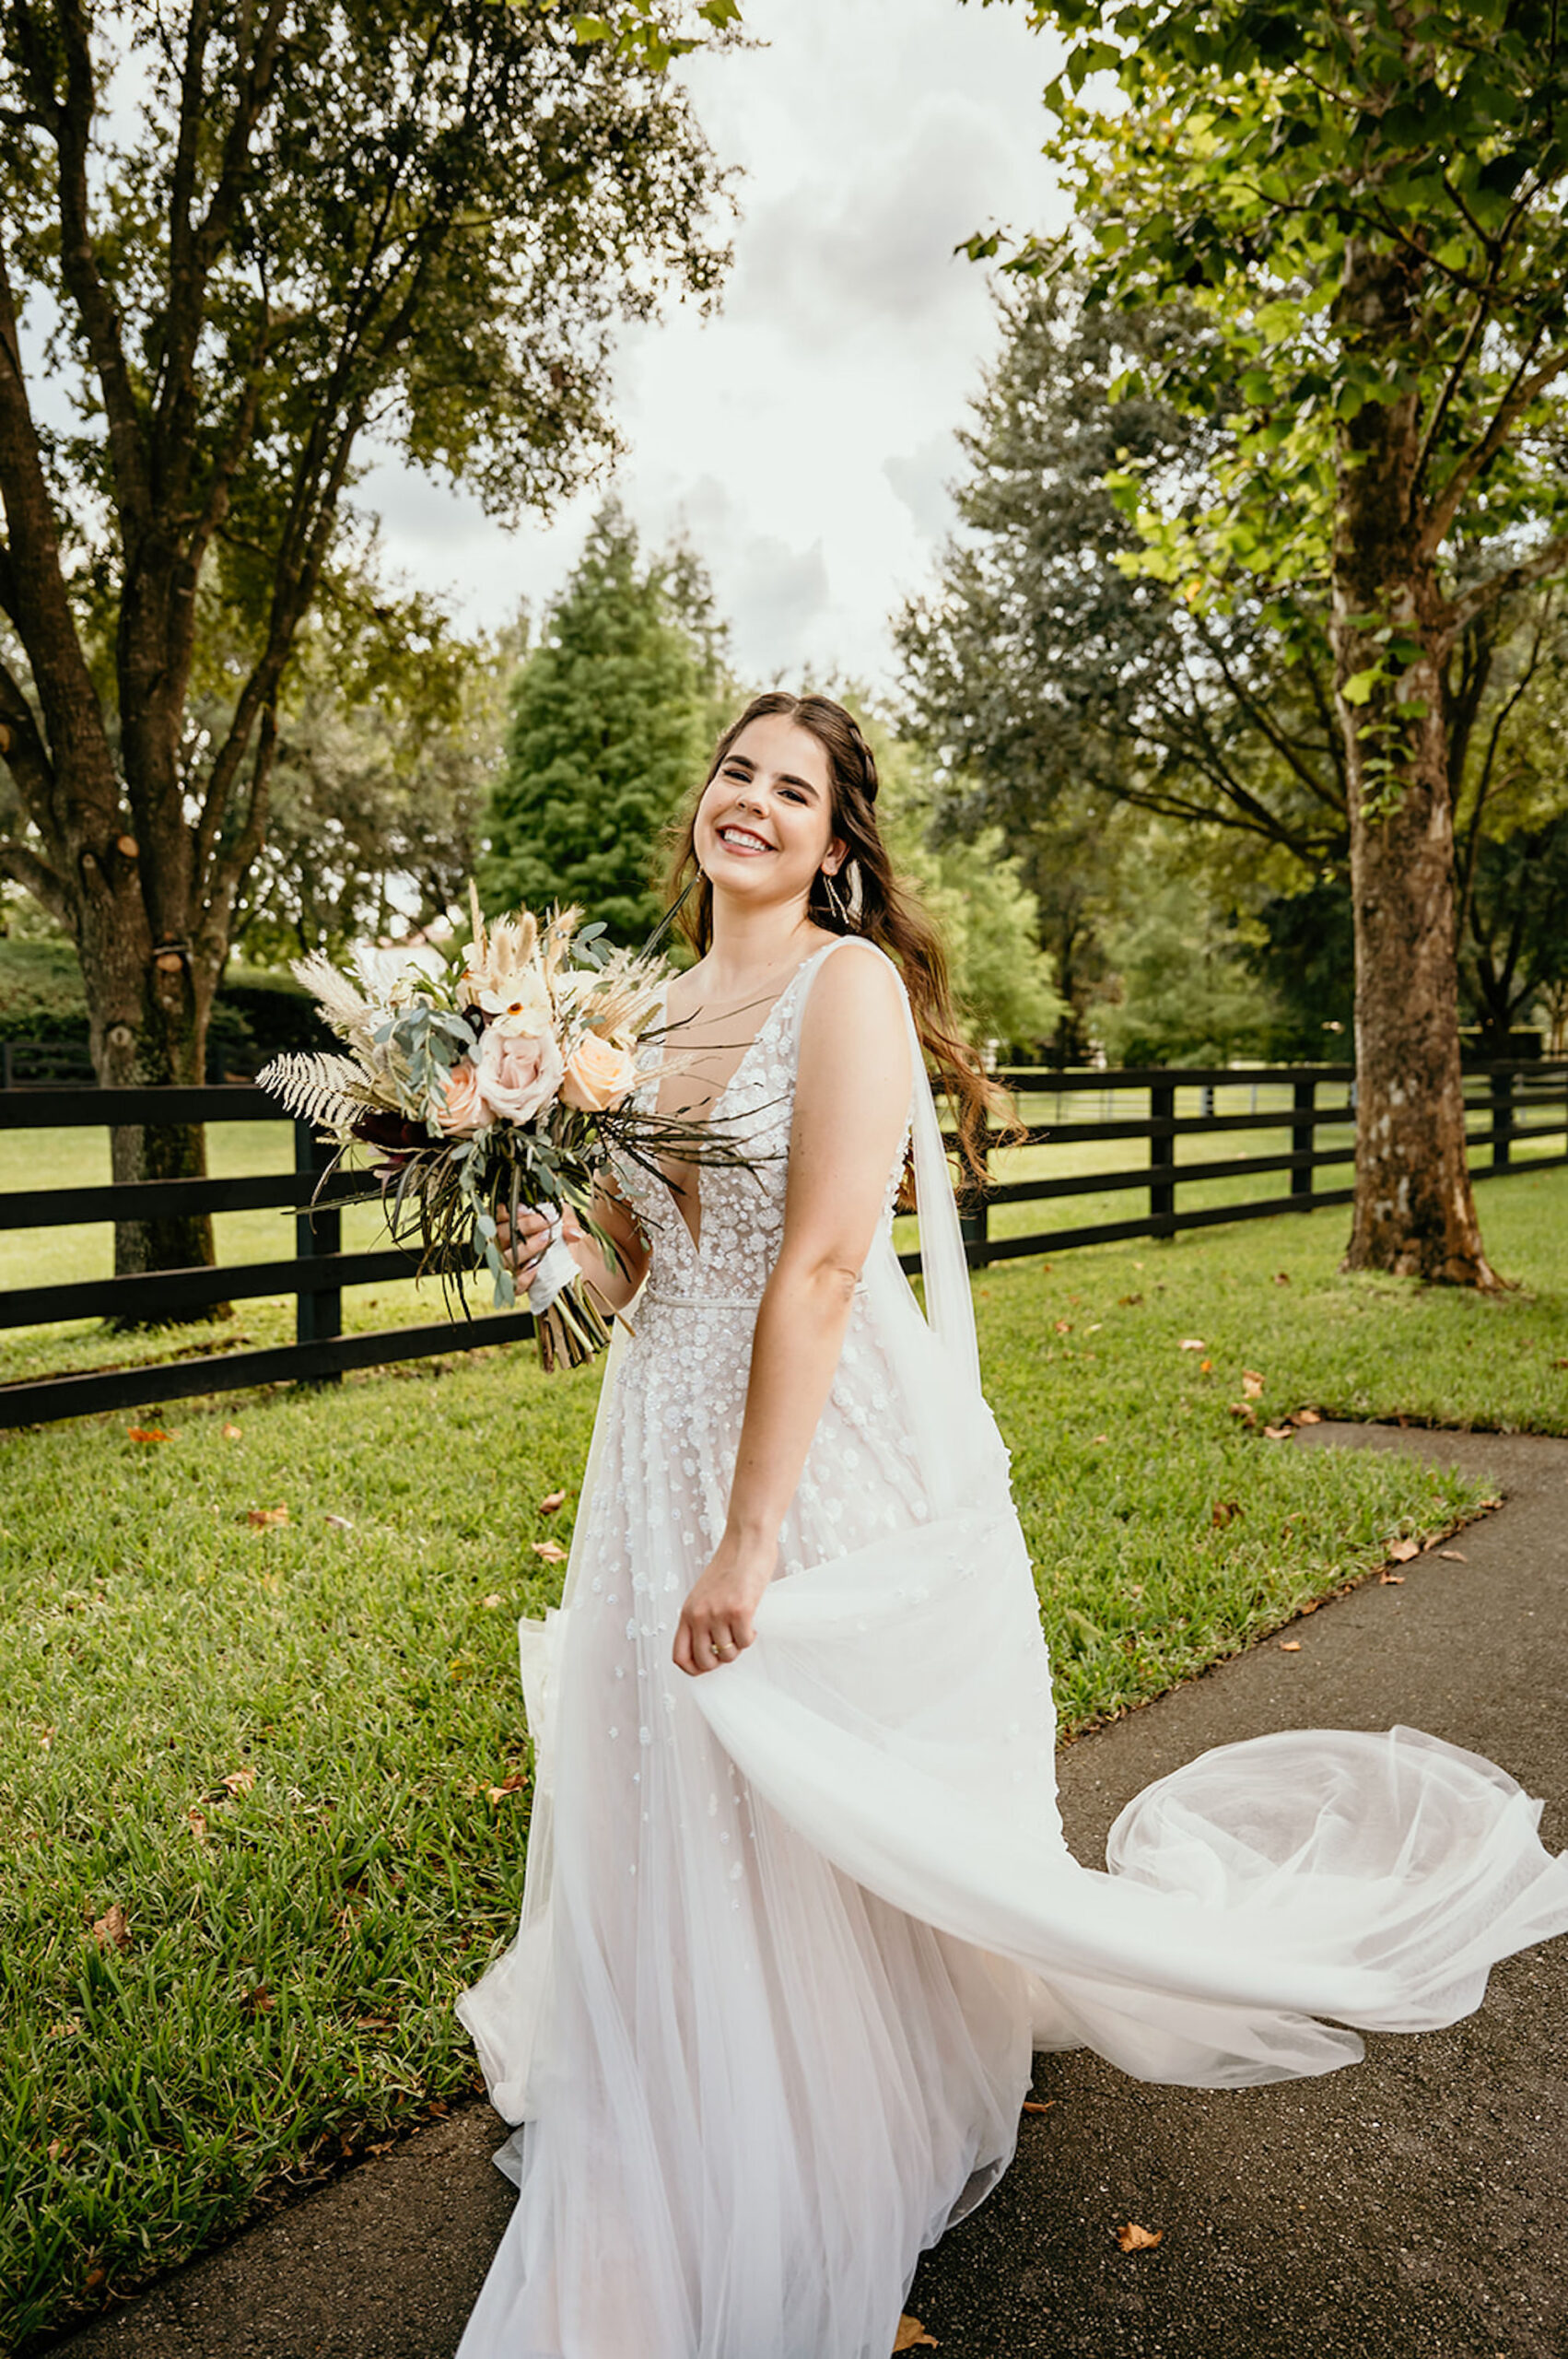 Natural Glam | Boho Peach Roses, White Fern, Greenery and Dried Flower Wedding Bouquet Ideas | Tampa Bay Florist Save The Date Florida | Hair and Makeup Artist Adore Bridal Hair and Makeup